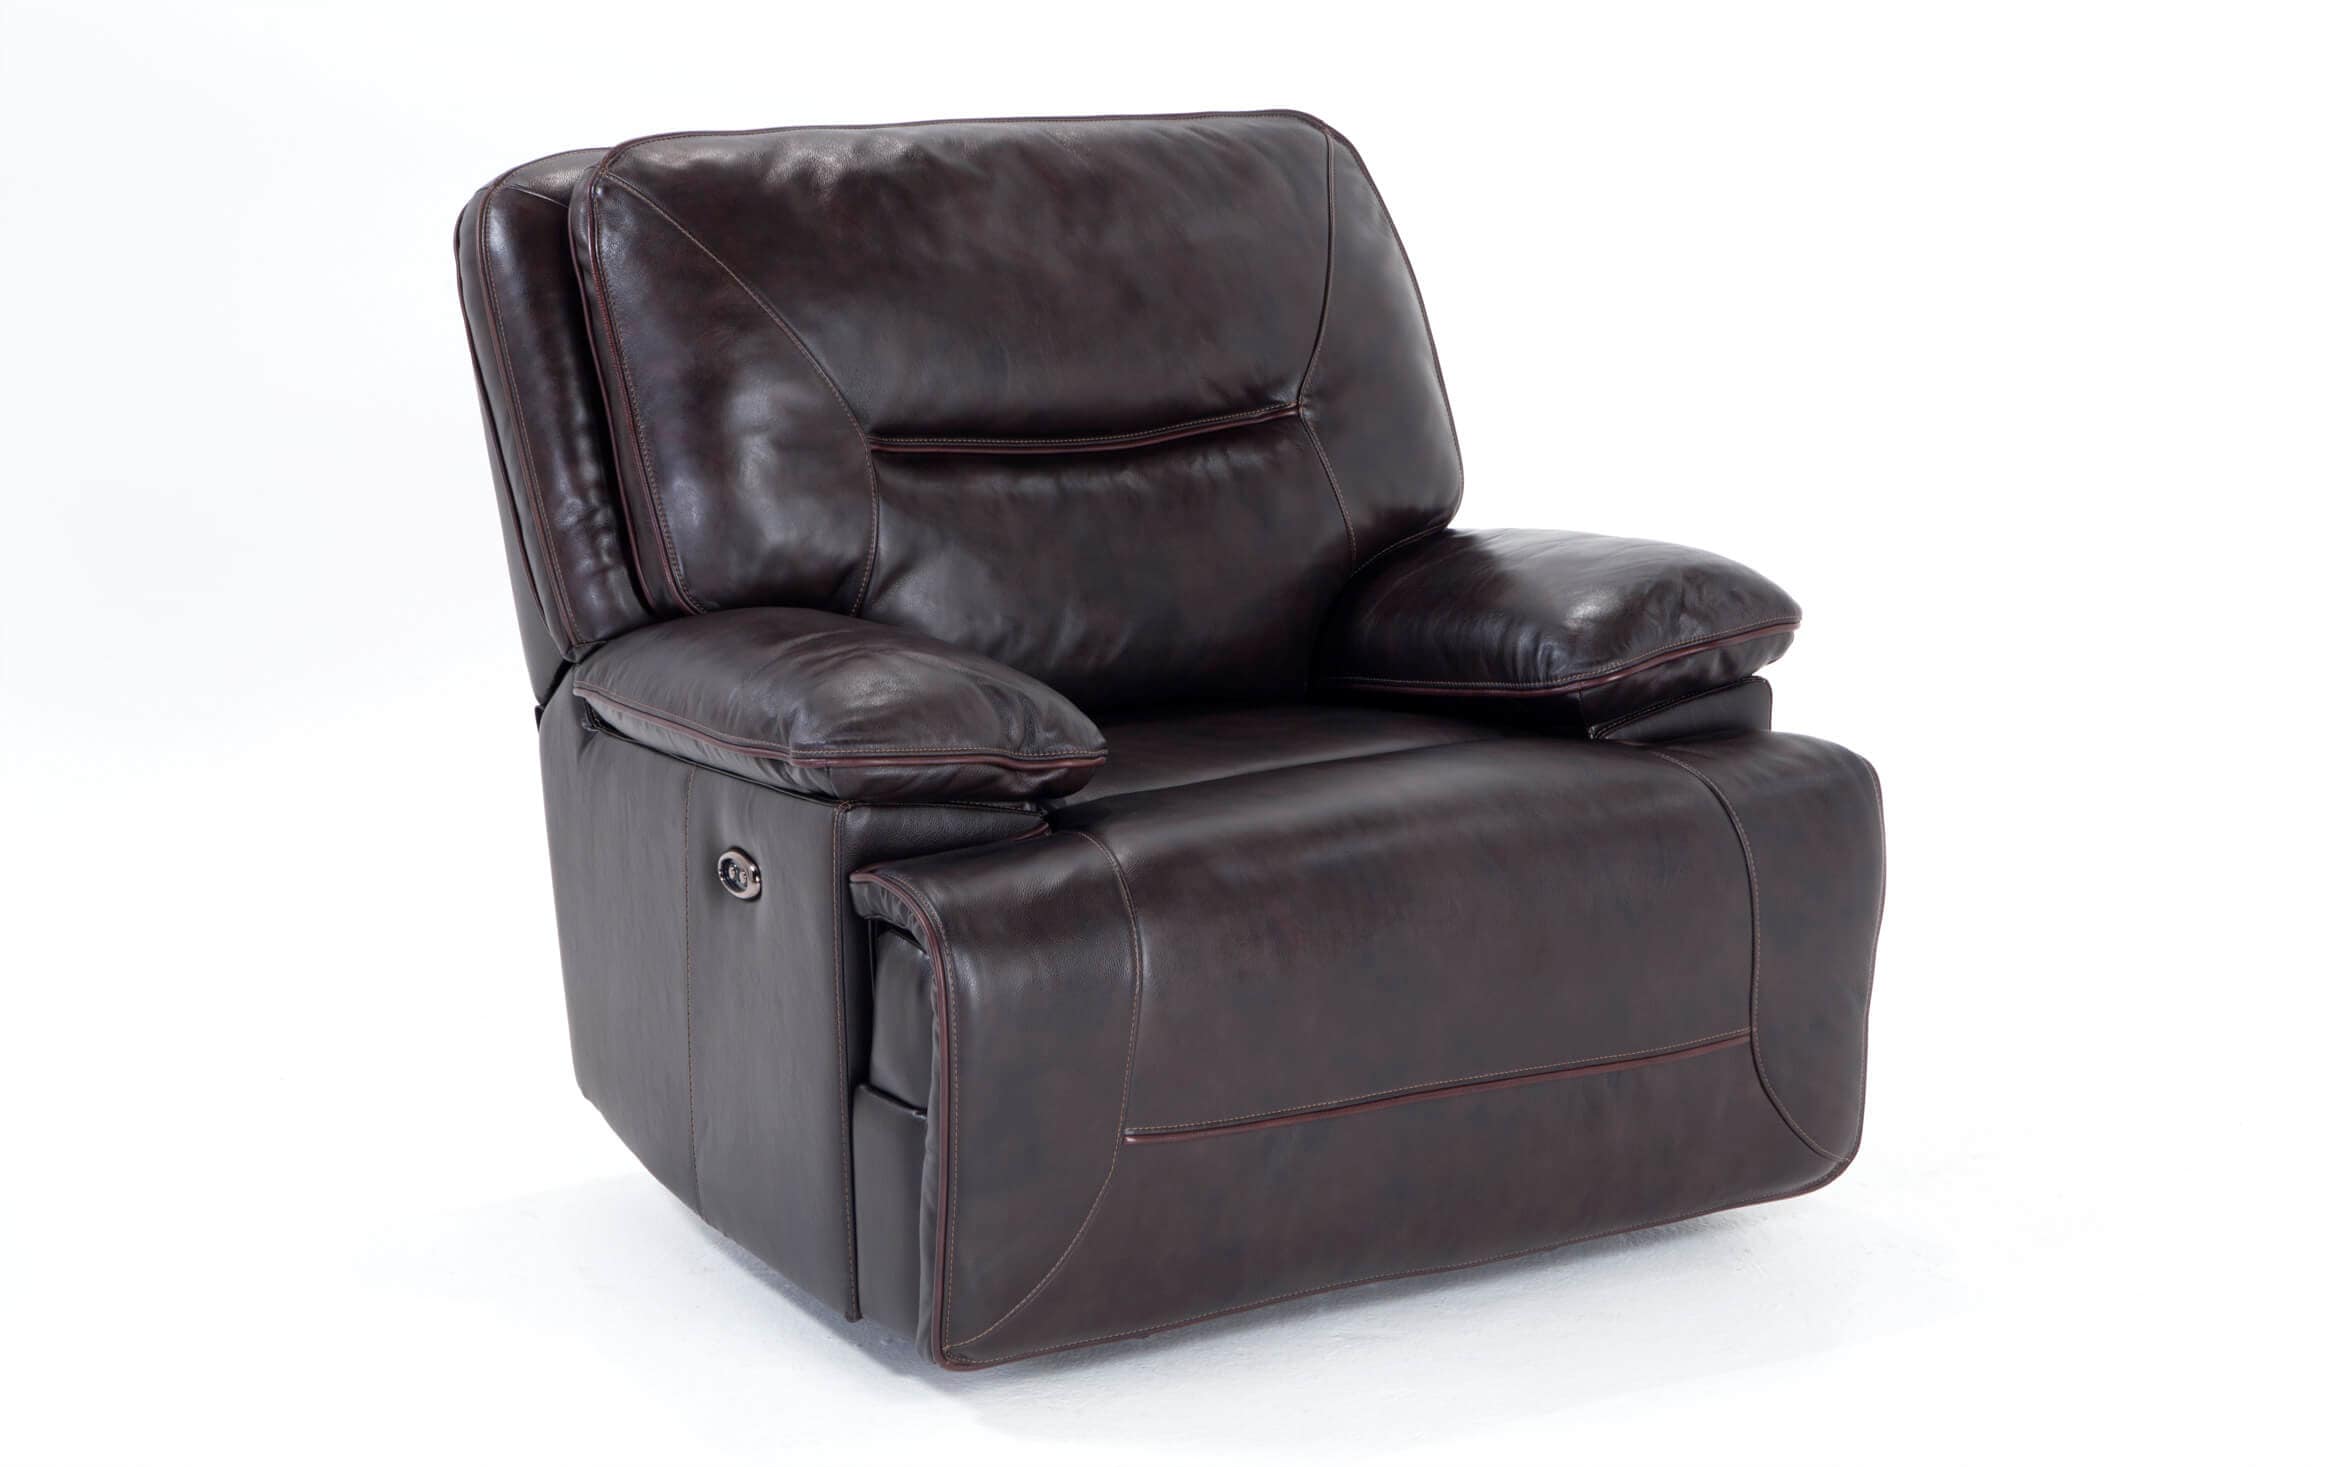 Marco Leather Power Recliner Bob S, Rustic Leather Light Tan Electric Recliner Chair